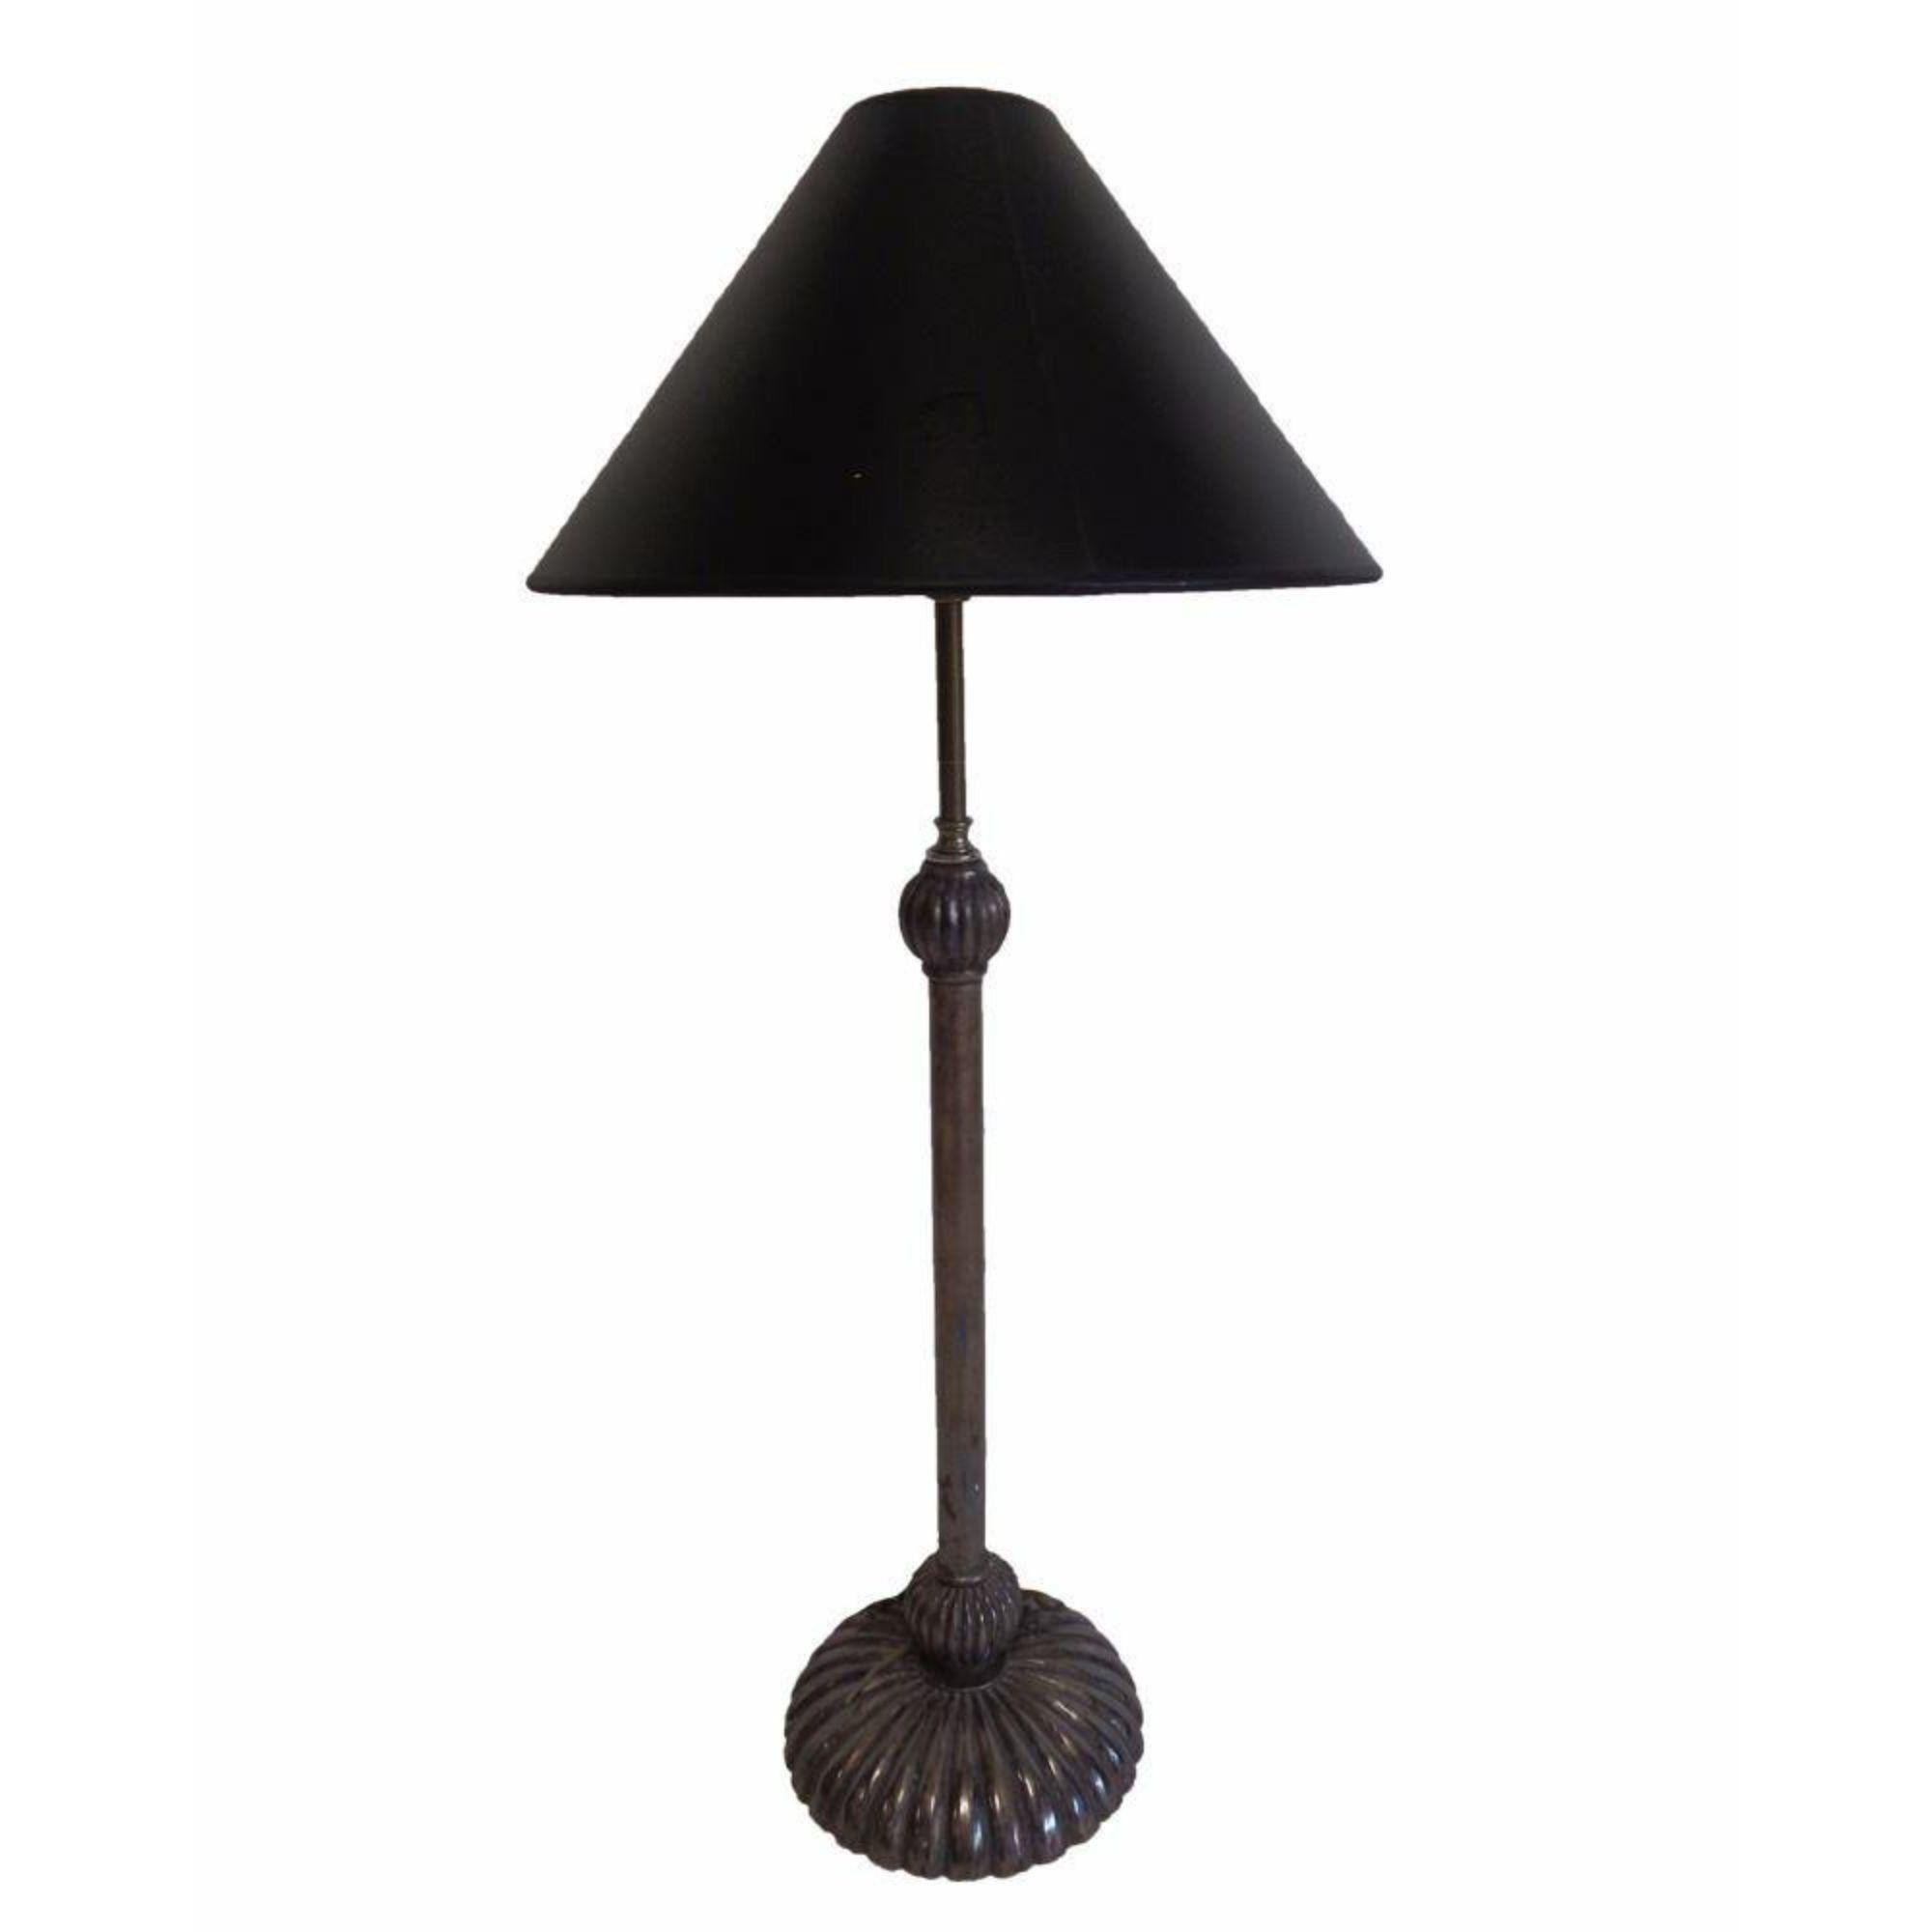 Charles Pollock for William Switzer Eclipse Giltwood Table Lamp
Additional information:
Materials: Giltwood
Color: Gray
Brand: William Switzer
Designer: Charles Pollock
Period: 2010s
Styles: Art Deco, Baroque
Lamp Shade: Not Included
Item